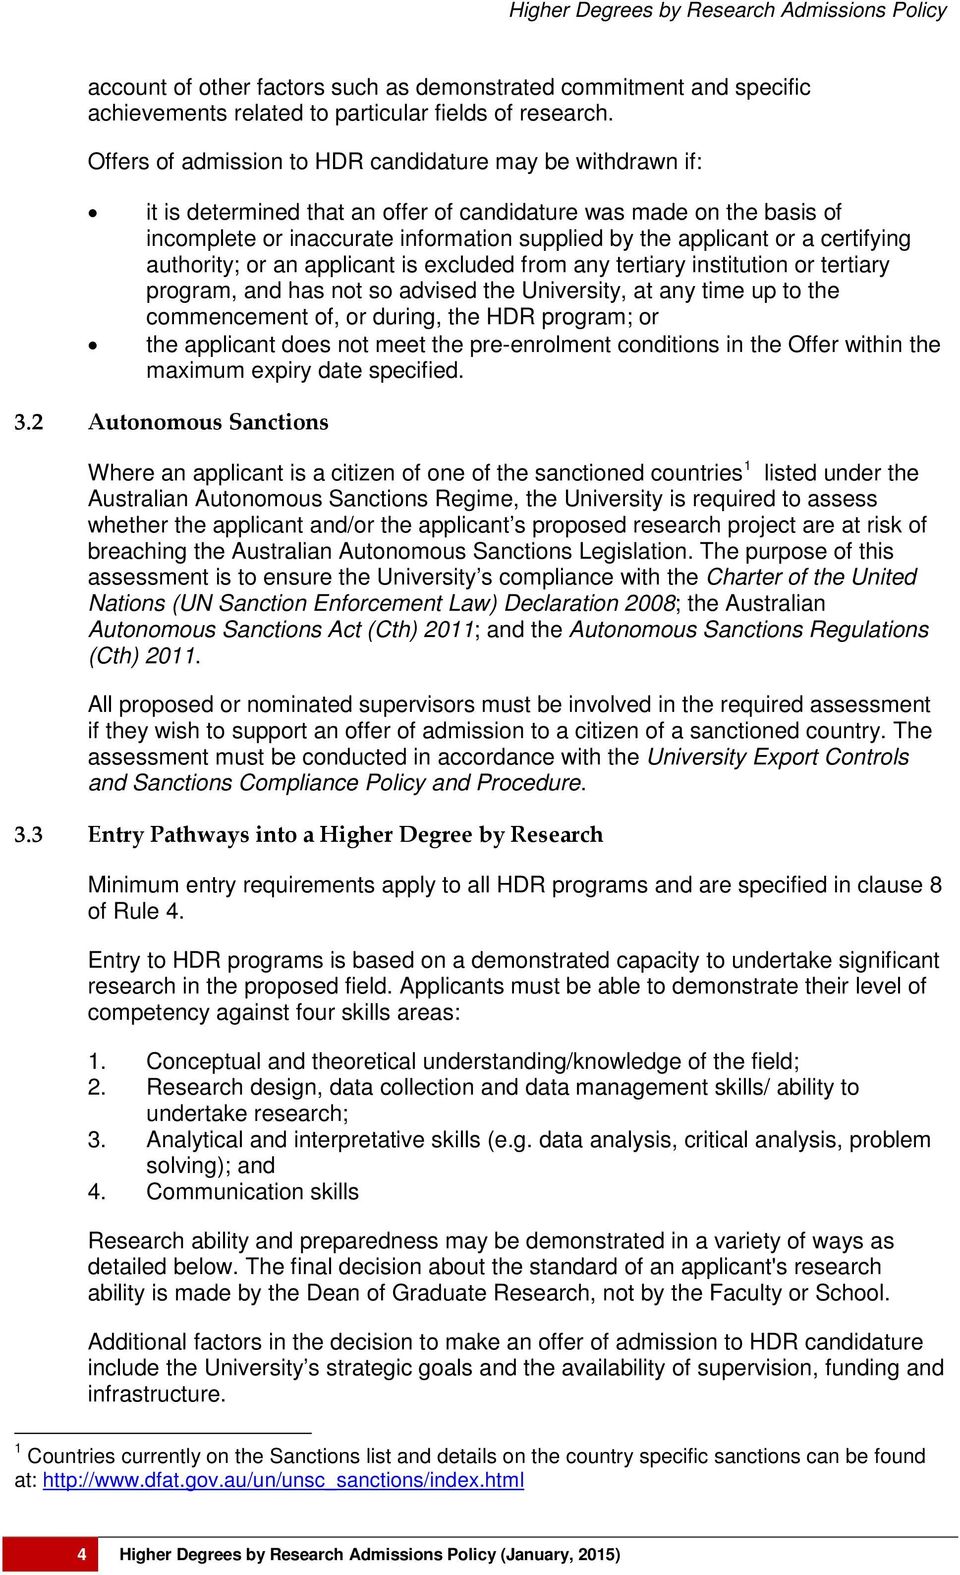 certifying authority; or an applicant is excluded from any tertiary institution or tertiary program, and has not so advised the University, at any time up to the commencement of, or during, the HDR